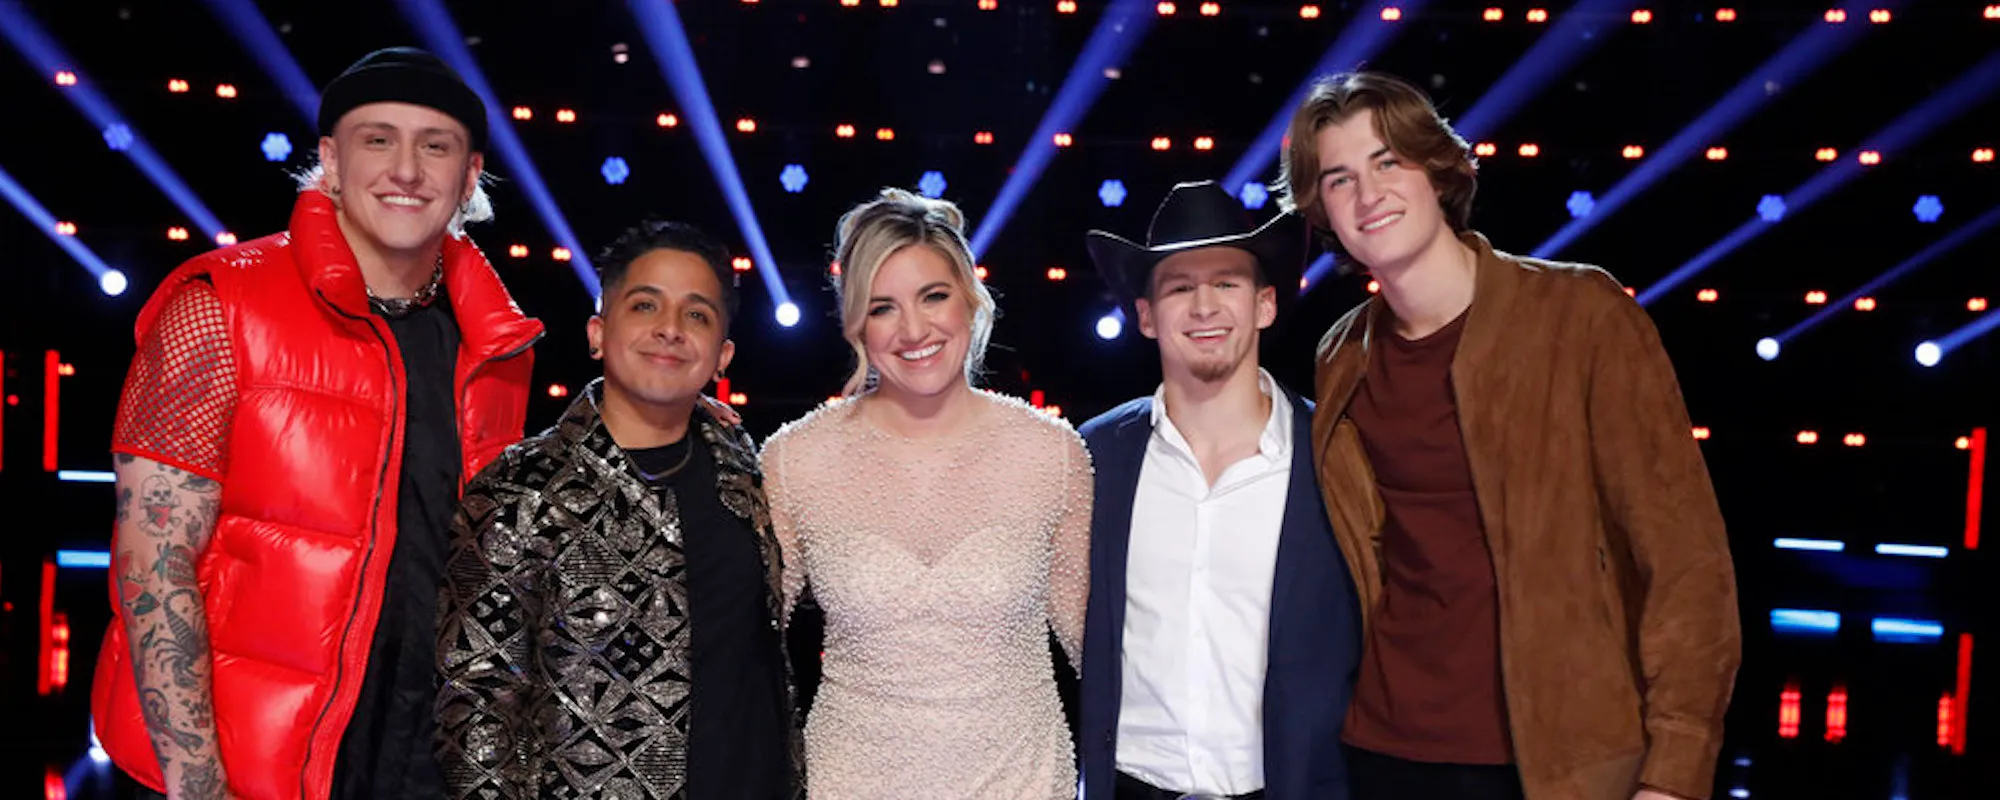 The Top 5 Finalists of ‘The Voice,’ Season 22